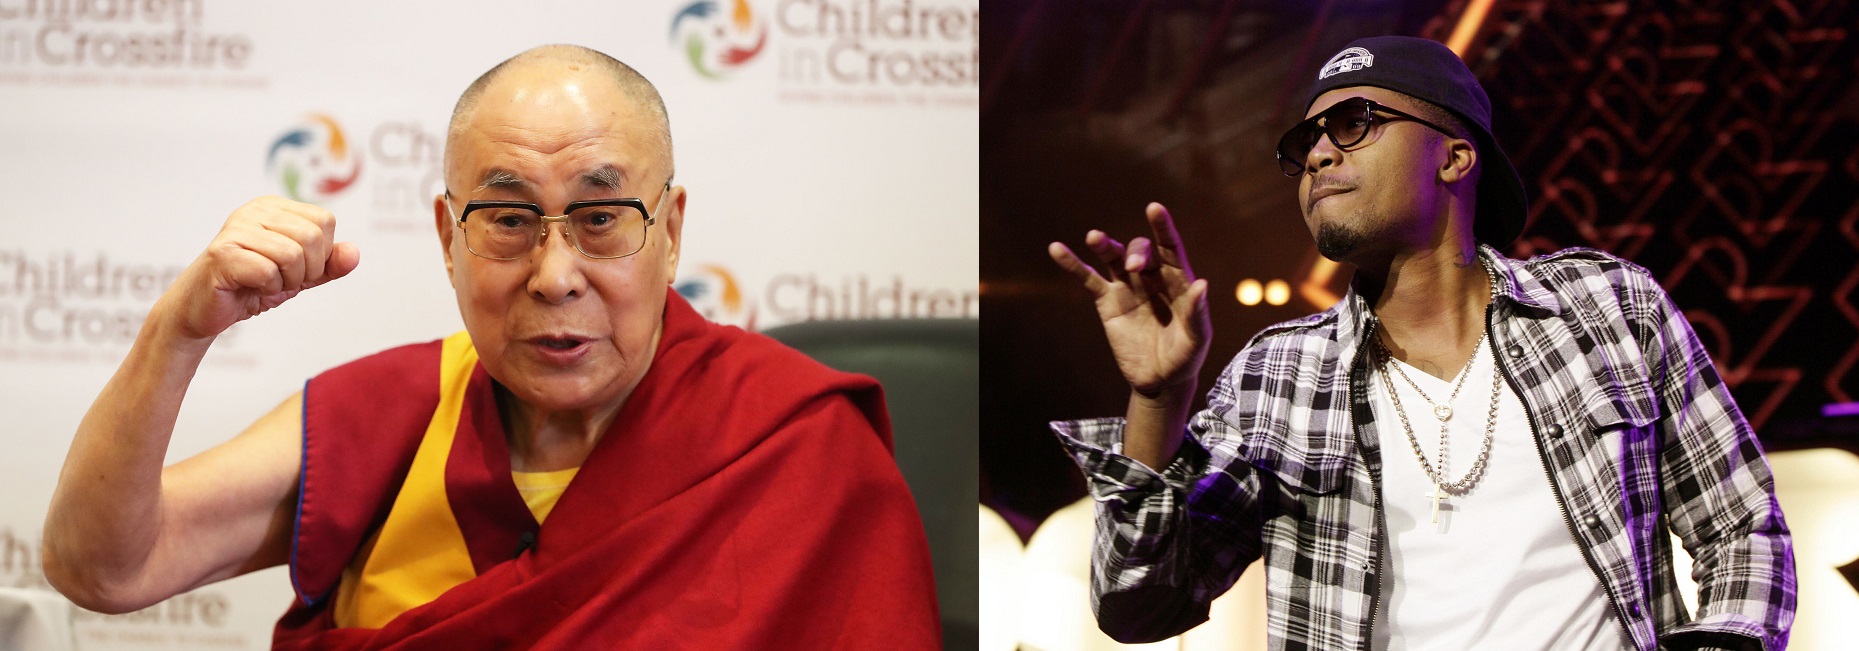 The dalai lama and the us rapper nas have slightly different views on sleep (niall carson/yui mok/pa)